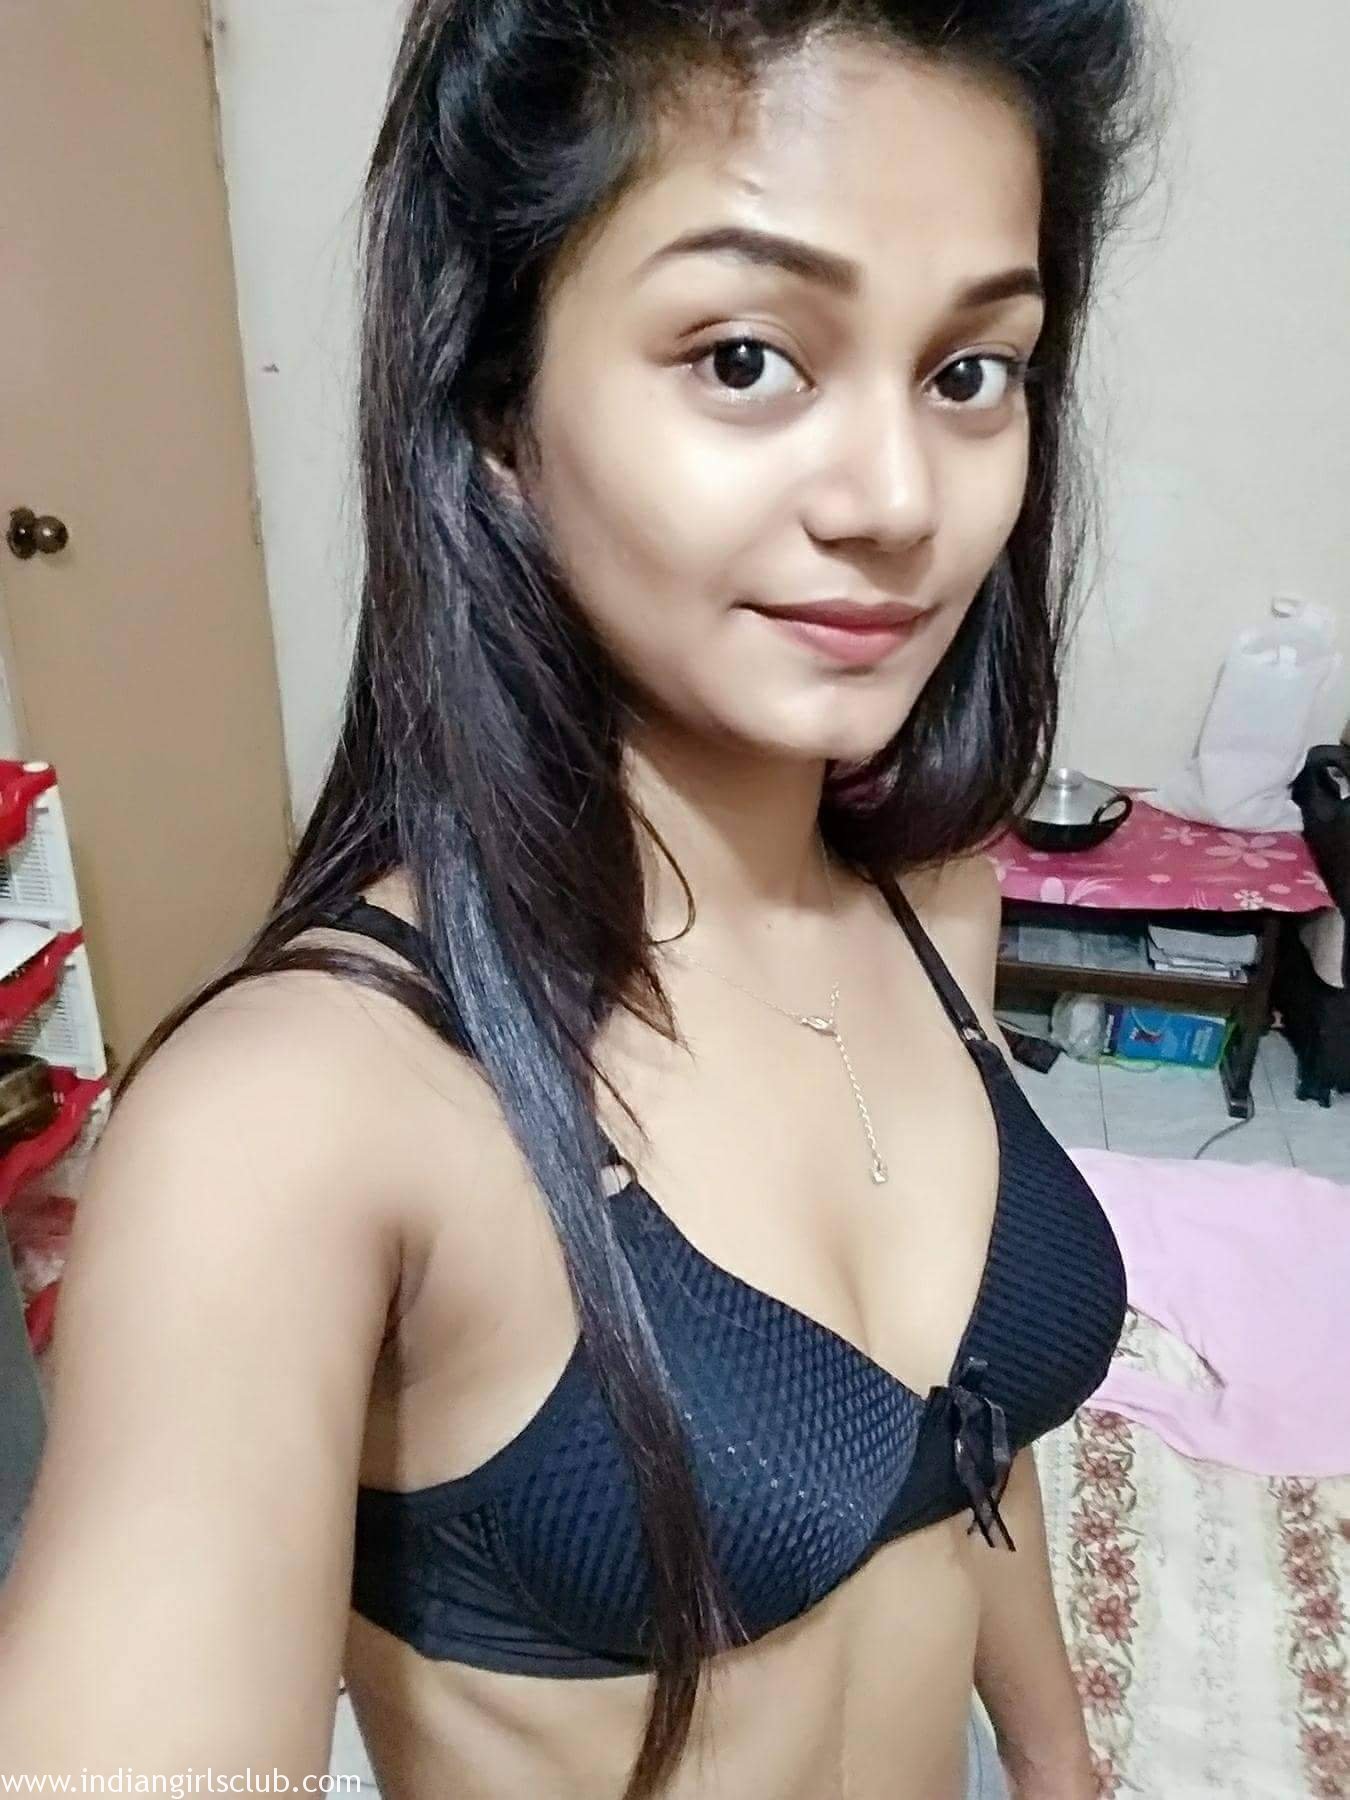 juicy_indian_teen_homemade_porn_20 - Indian Girls Club picture